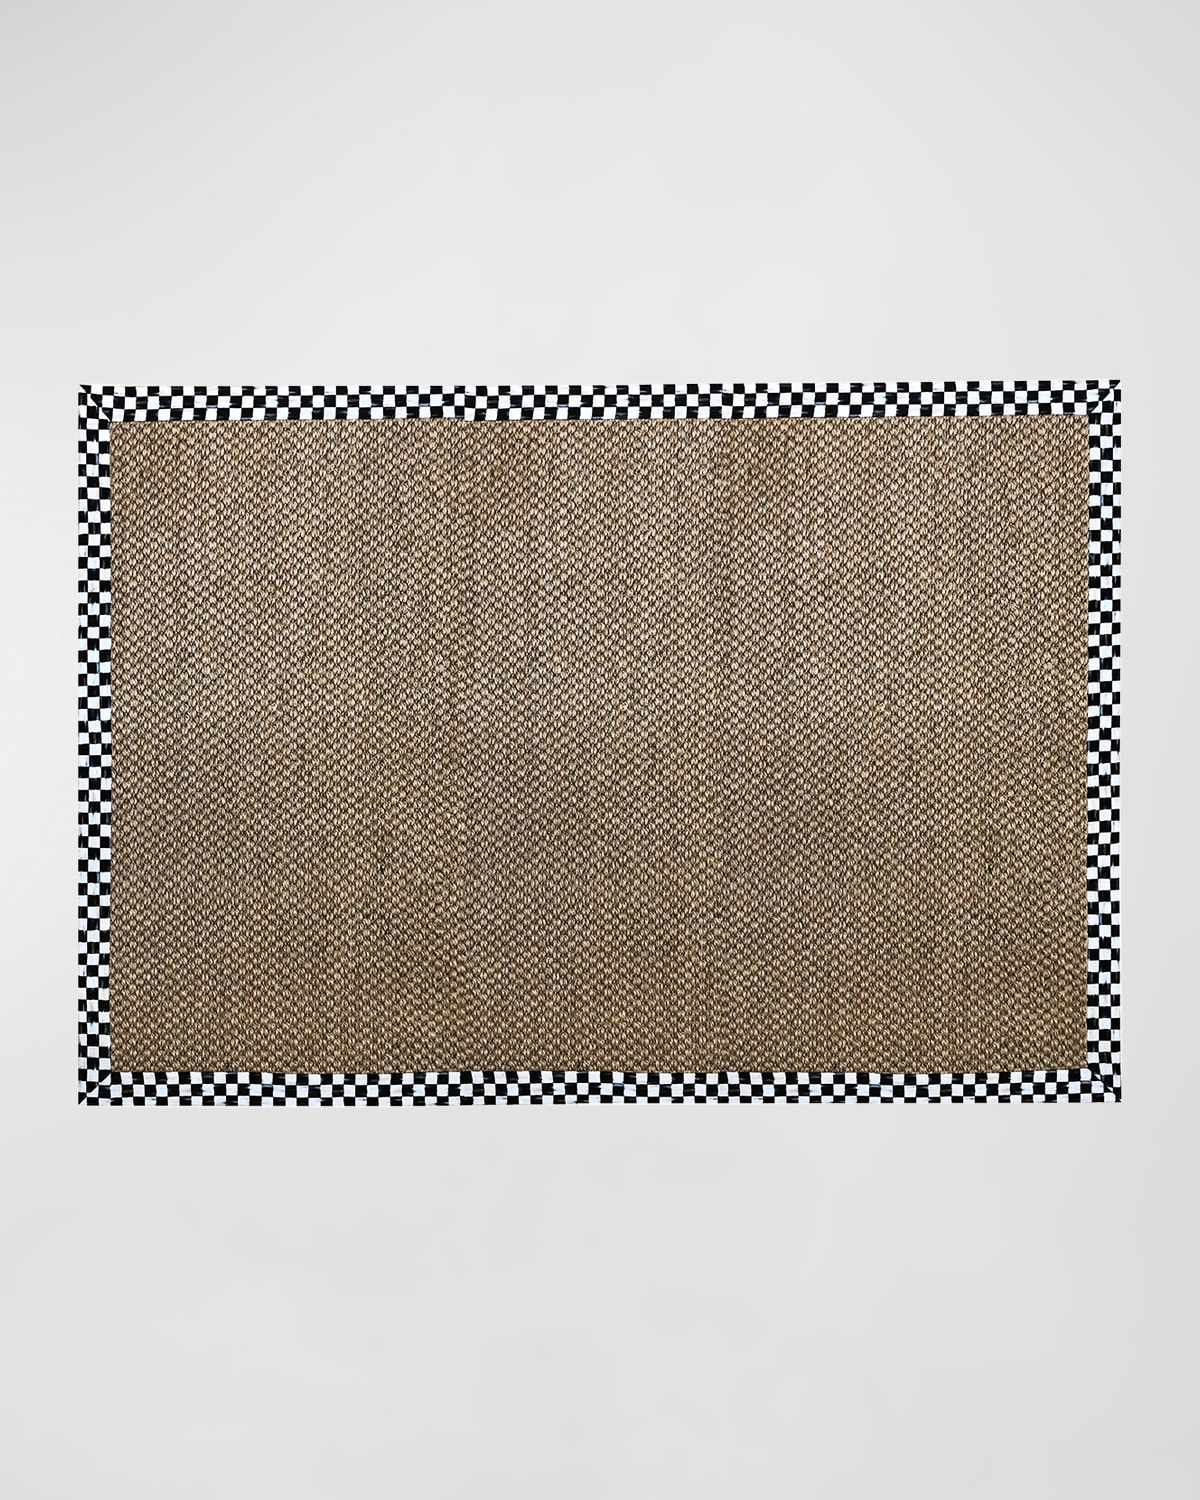 Mackenzie-childs Courtly Check Chunky Sisal Rug, 6' X 9' In Brown